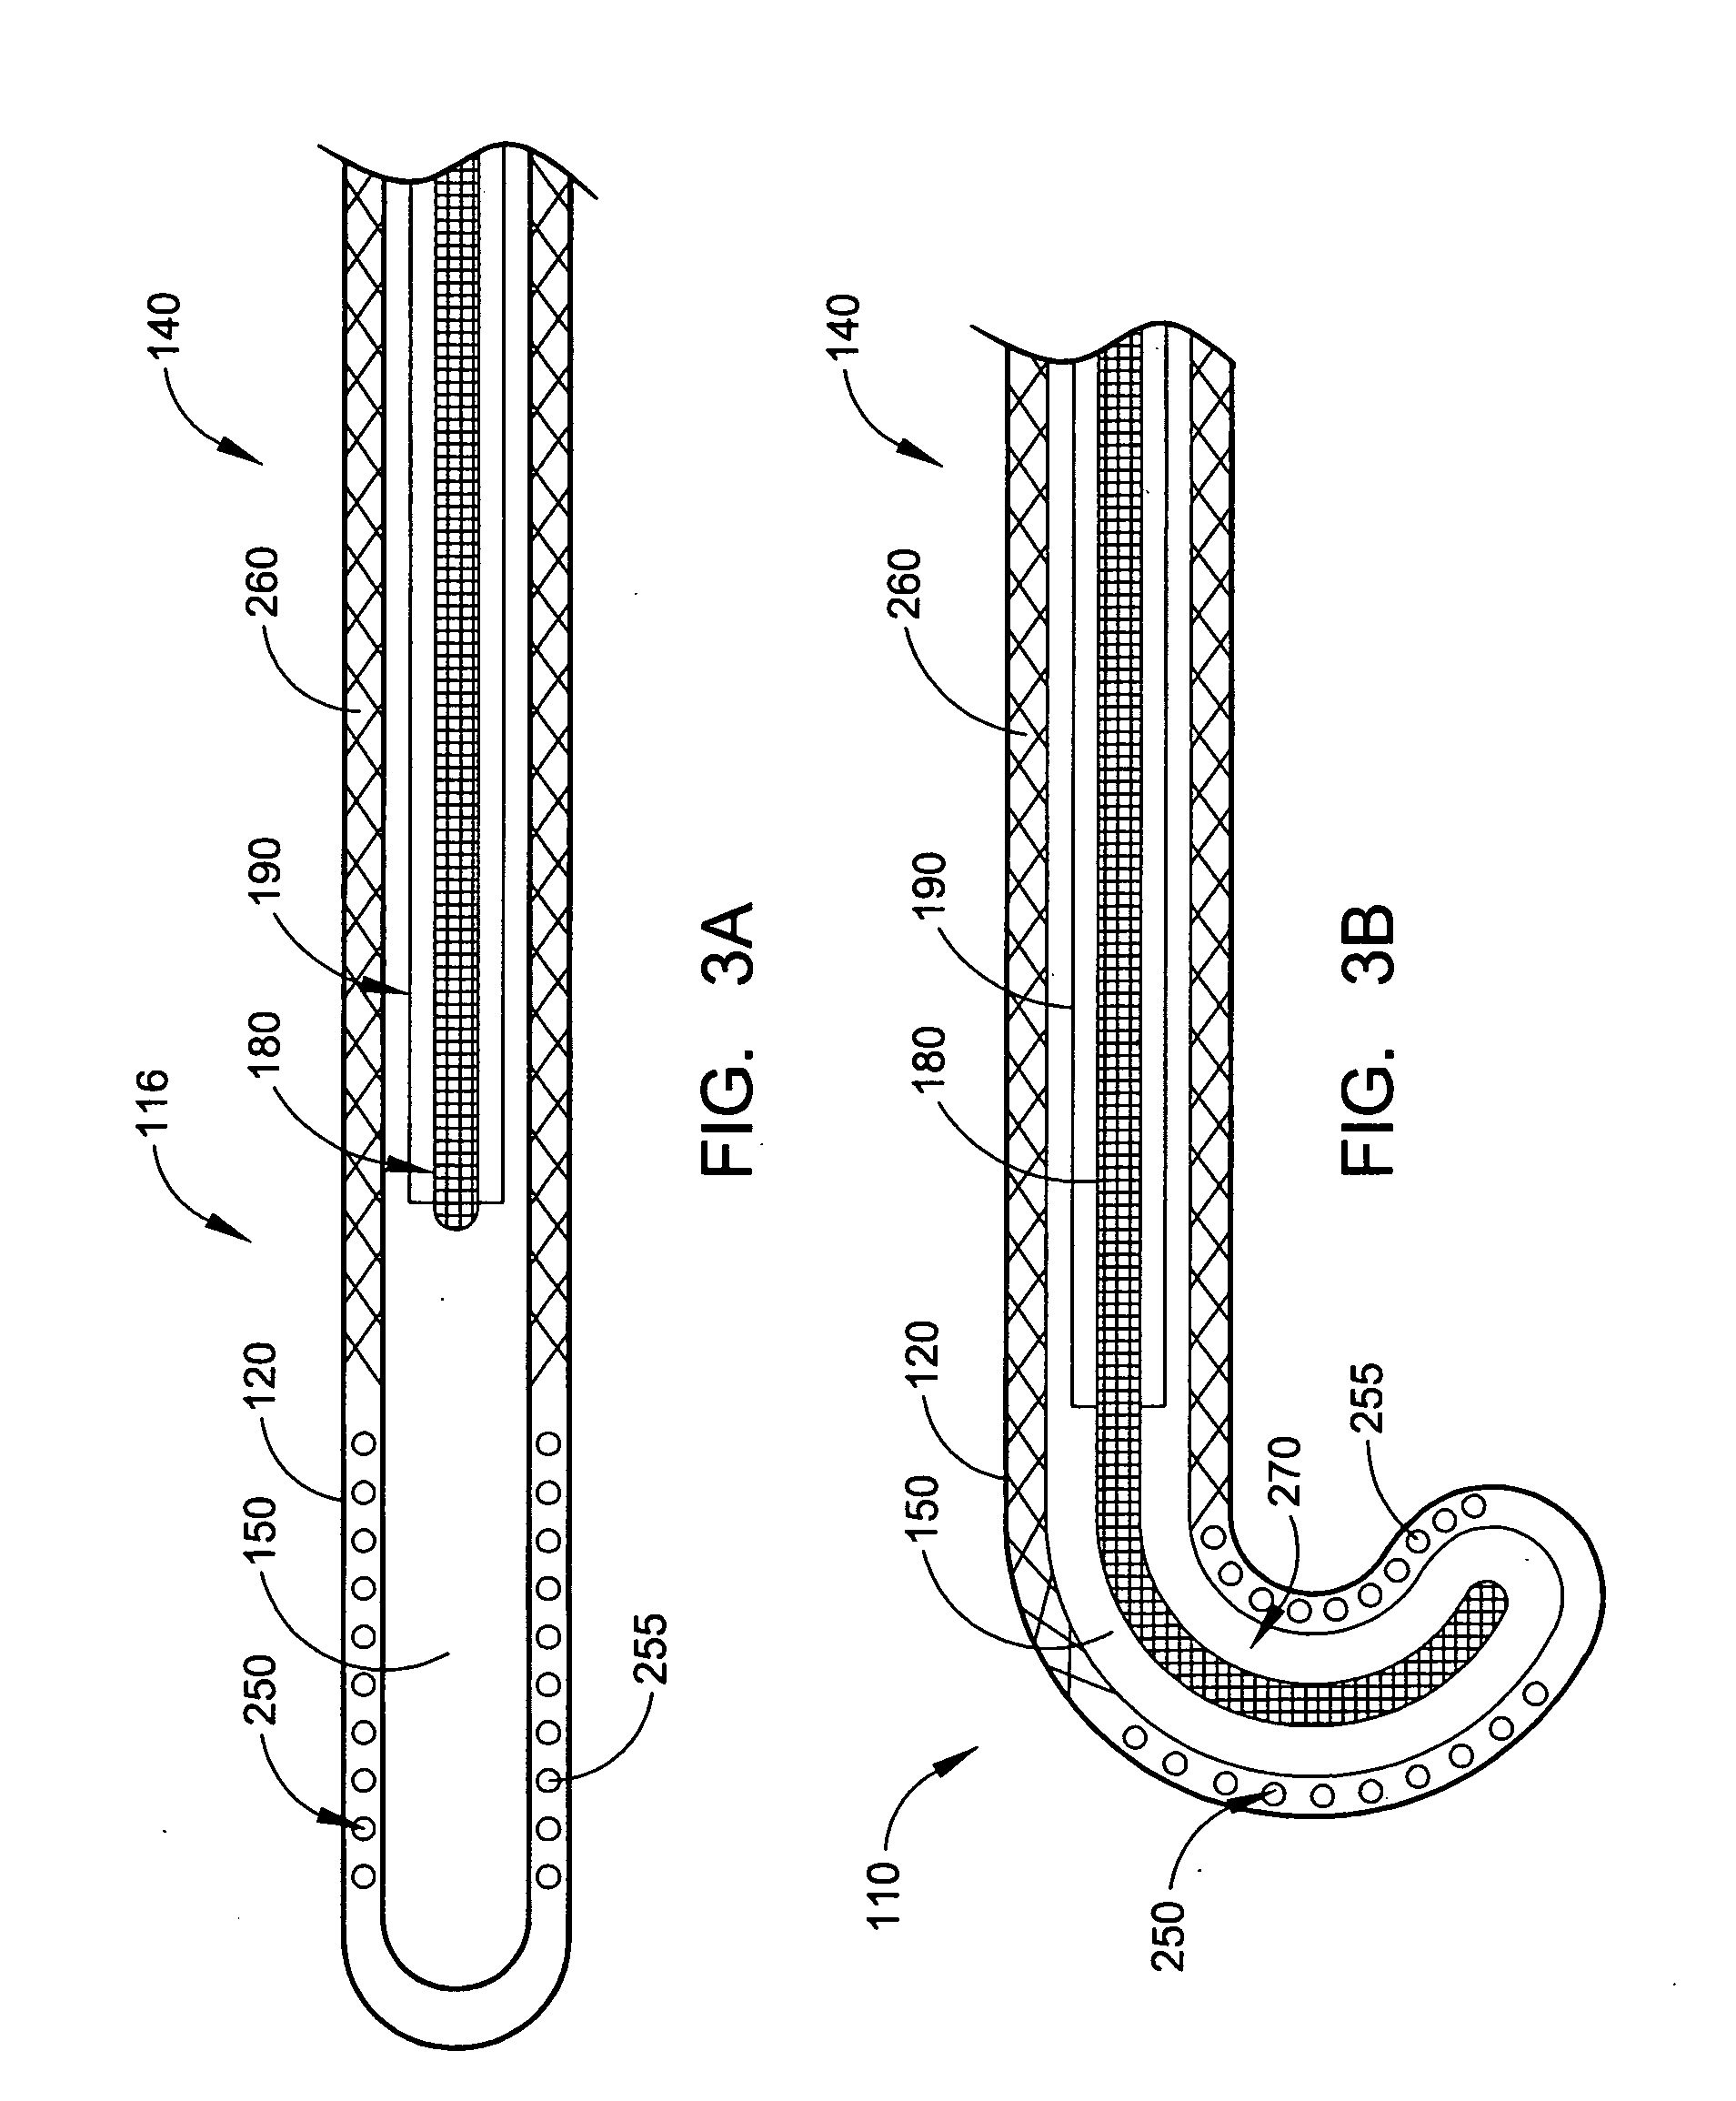 Radio-frequency-based catheter system with improved deflection and steering mechanisms